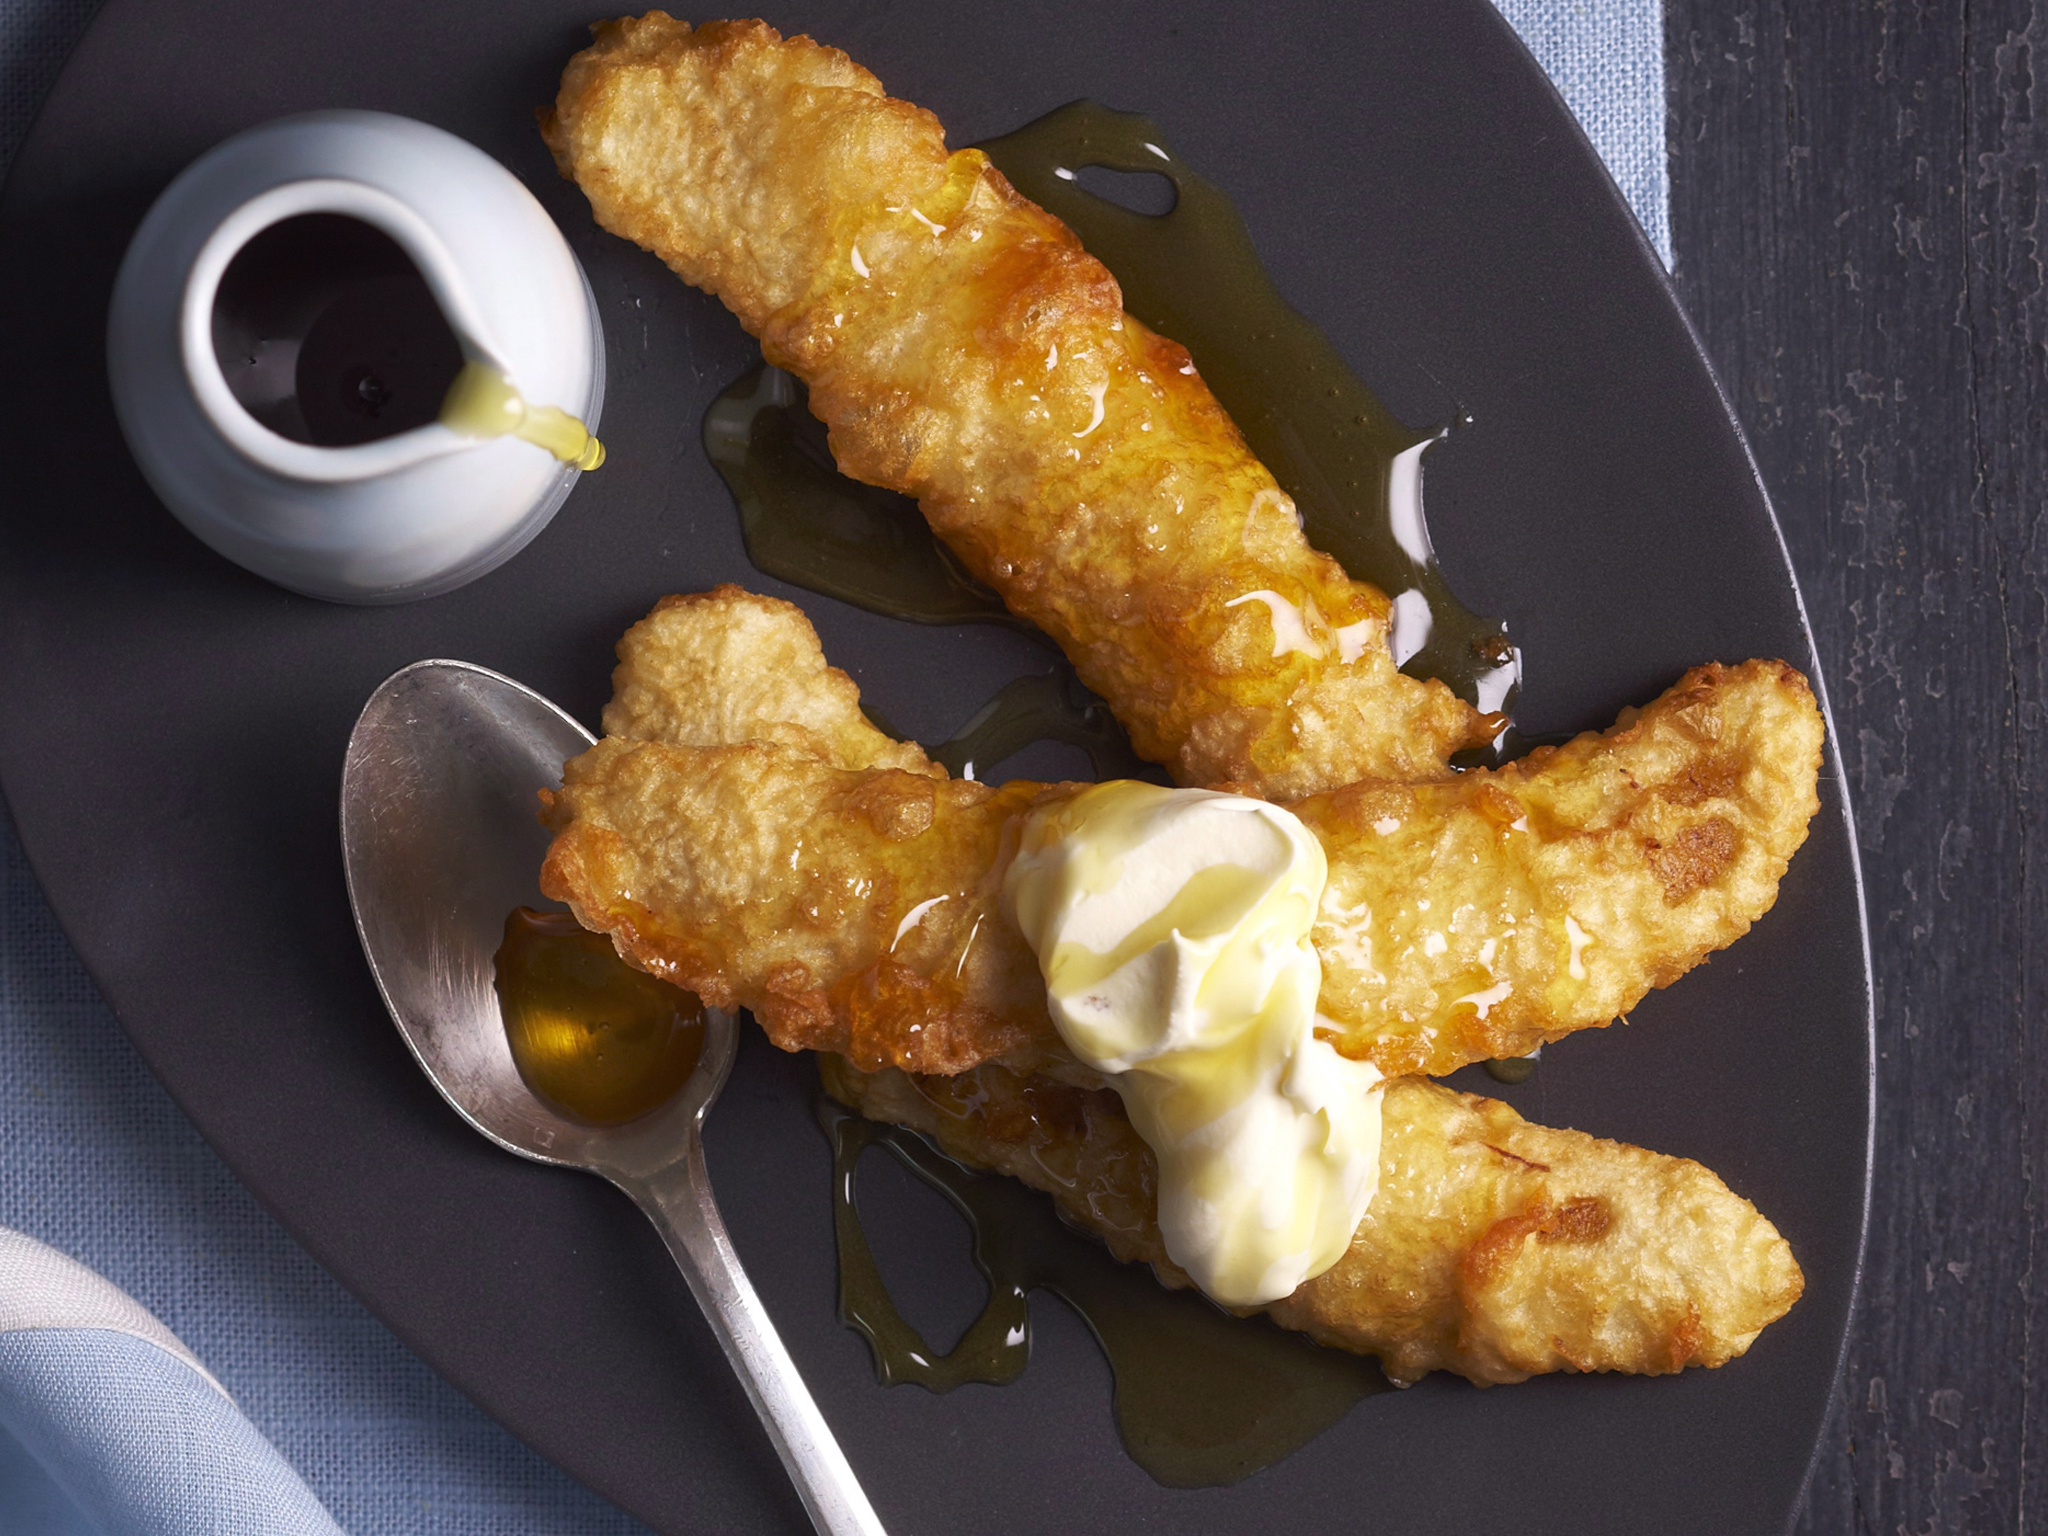 Banana fritters with golden syrup